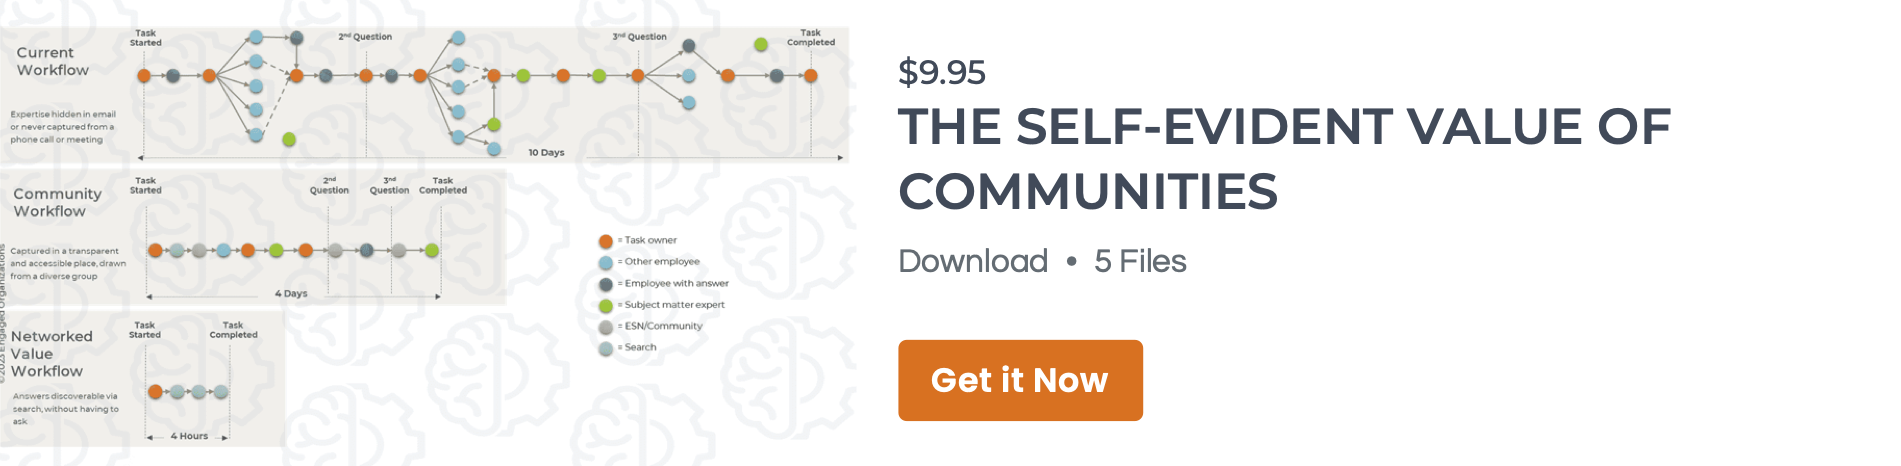 Engaged Organizations' Self-Evident Value of Communities graphic